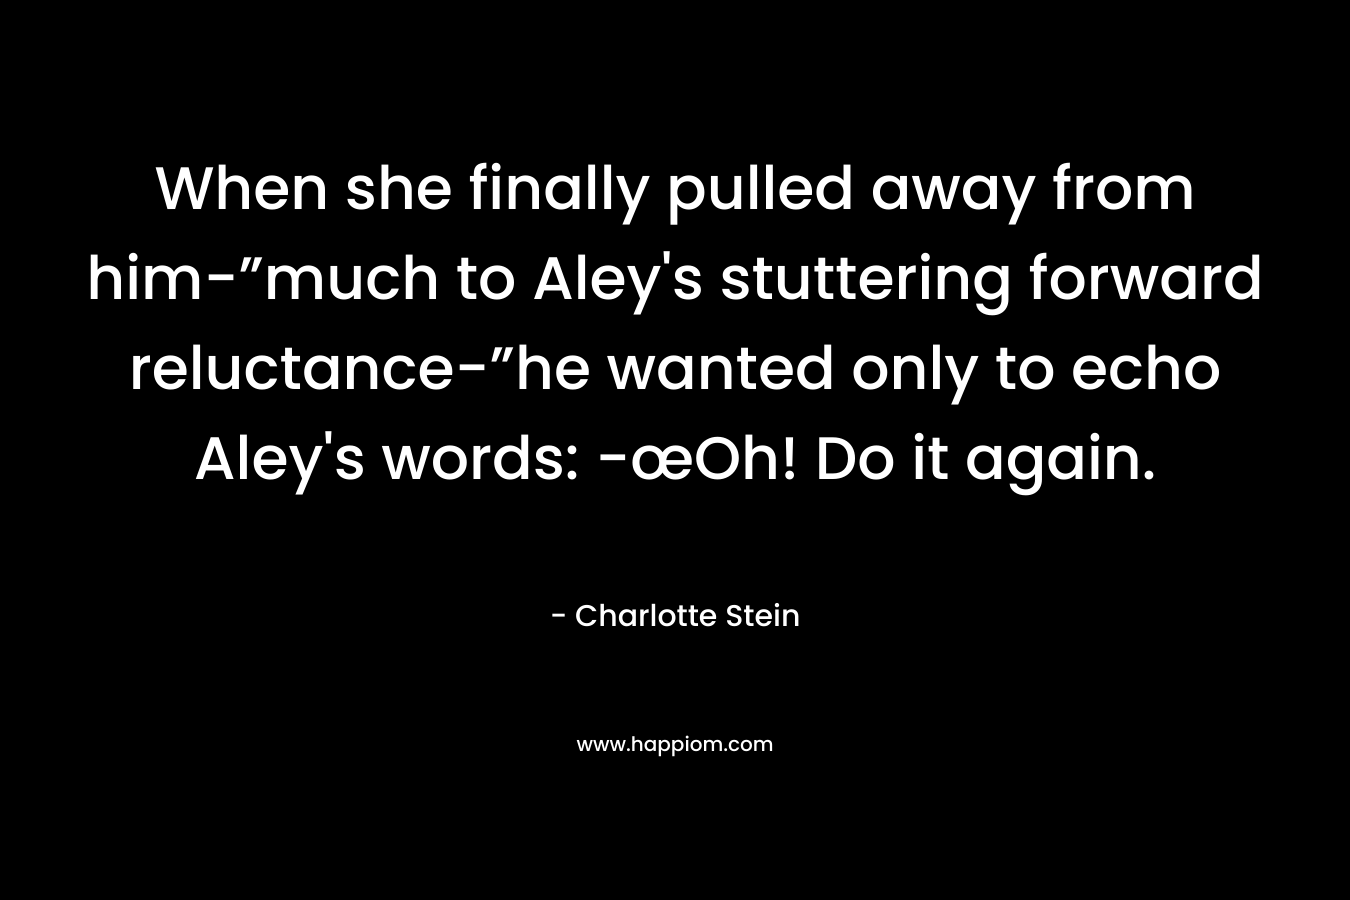 When she finally pulled away from him-”much to Aley’s stuttering forward reluctance-”he wanted only to echo Aley’s words: -œOh! Do it again. – Charlotte Stein